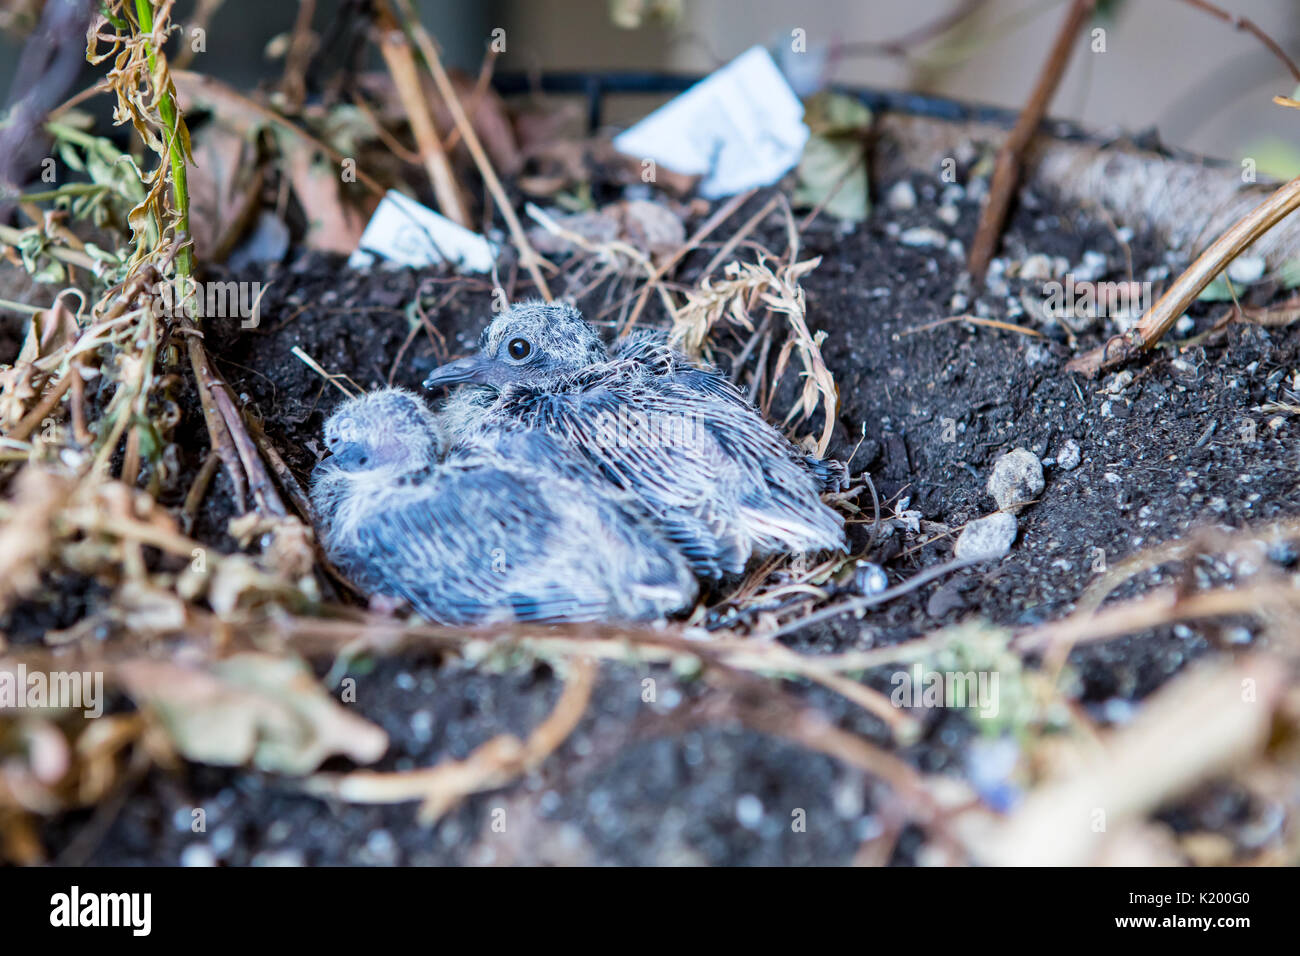 2 small helpless baby mourning dove chicks nesting in a gardens hanging basket in Southern California USA Stock Photo